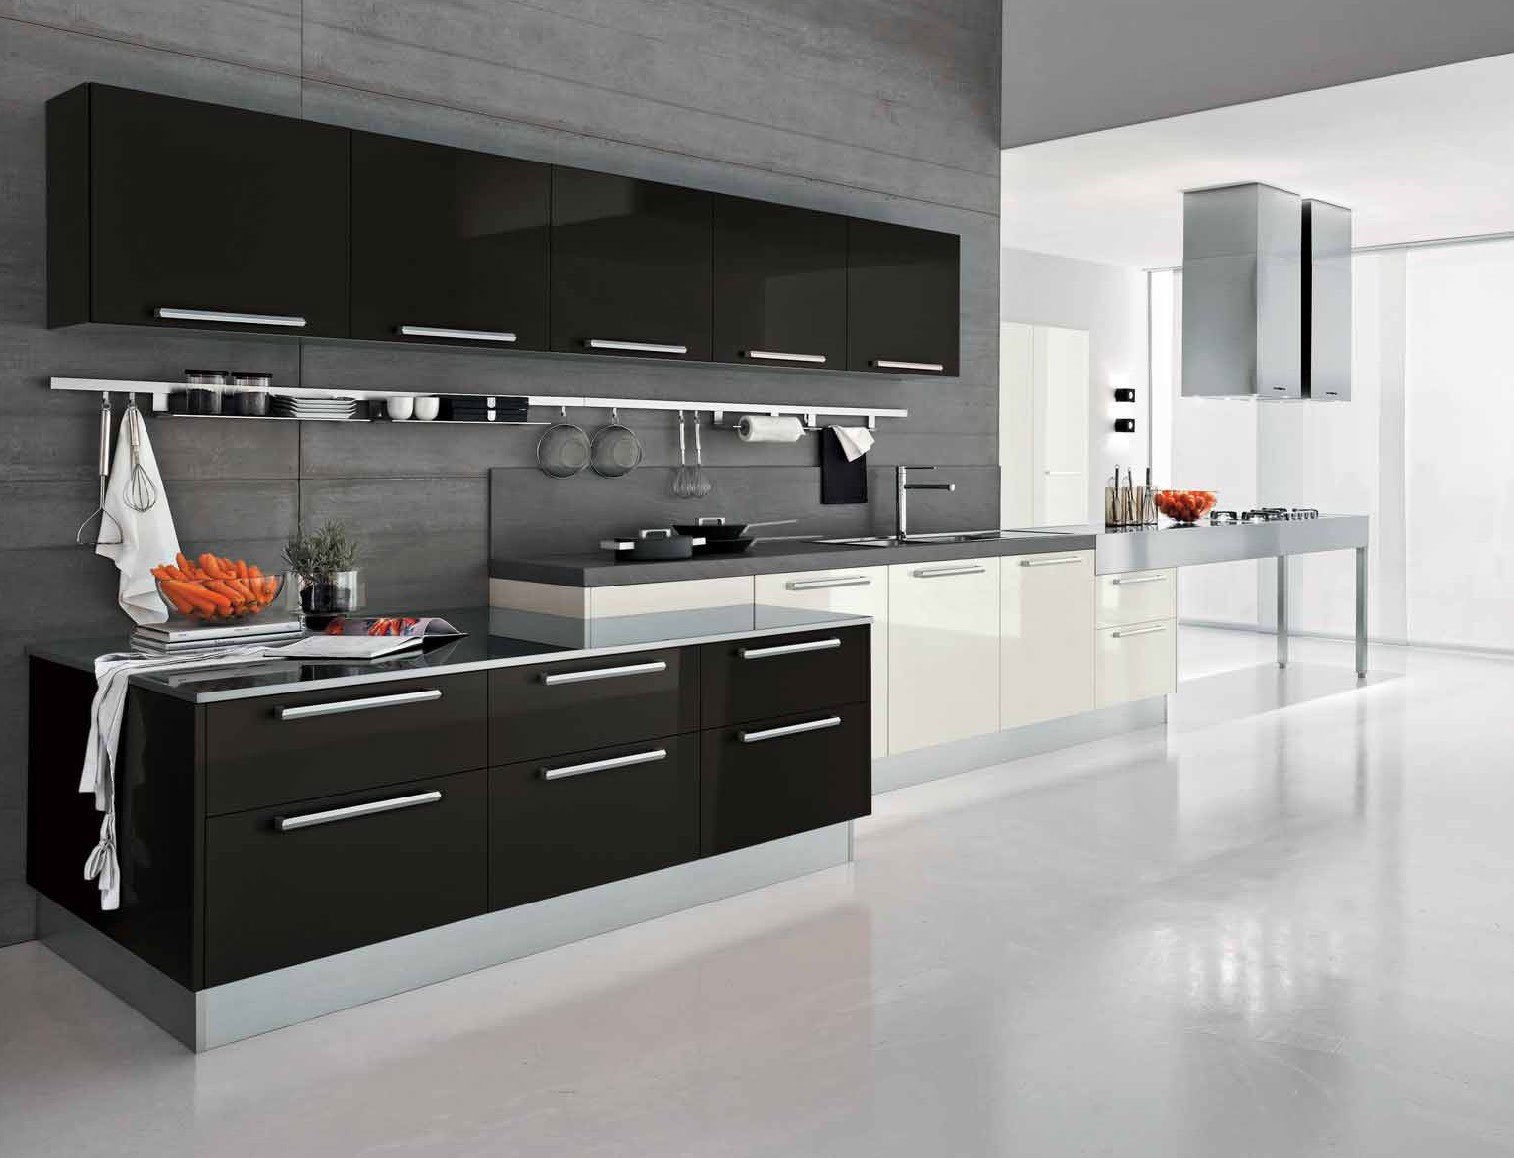 Black White With Fabulous Black White Kitchen Color With Modern Kitchen Cabinets In Sleek Design Completed With Sink And Furnished With Range Equipped With Countertop Kitchen Modern Kitchen Cabinets Design Inspiration